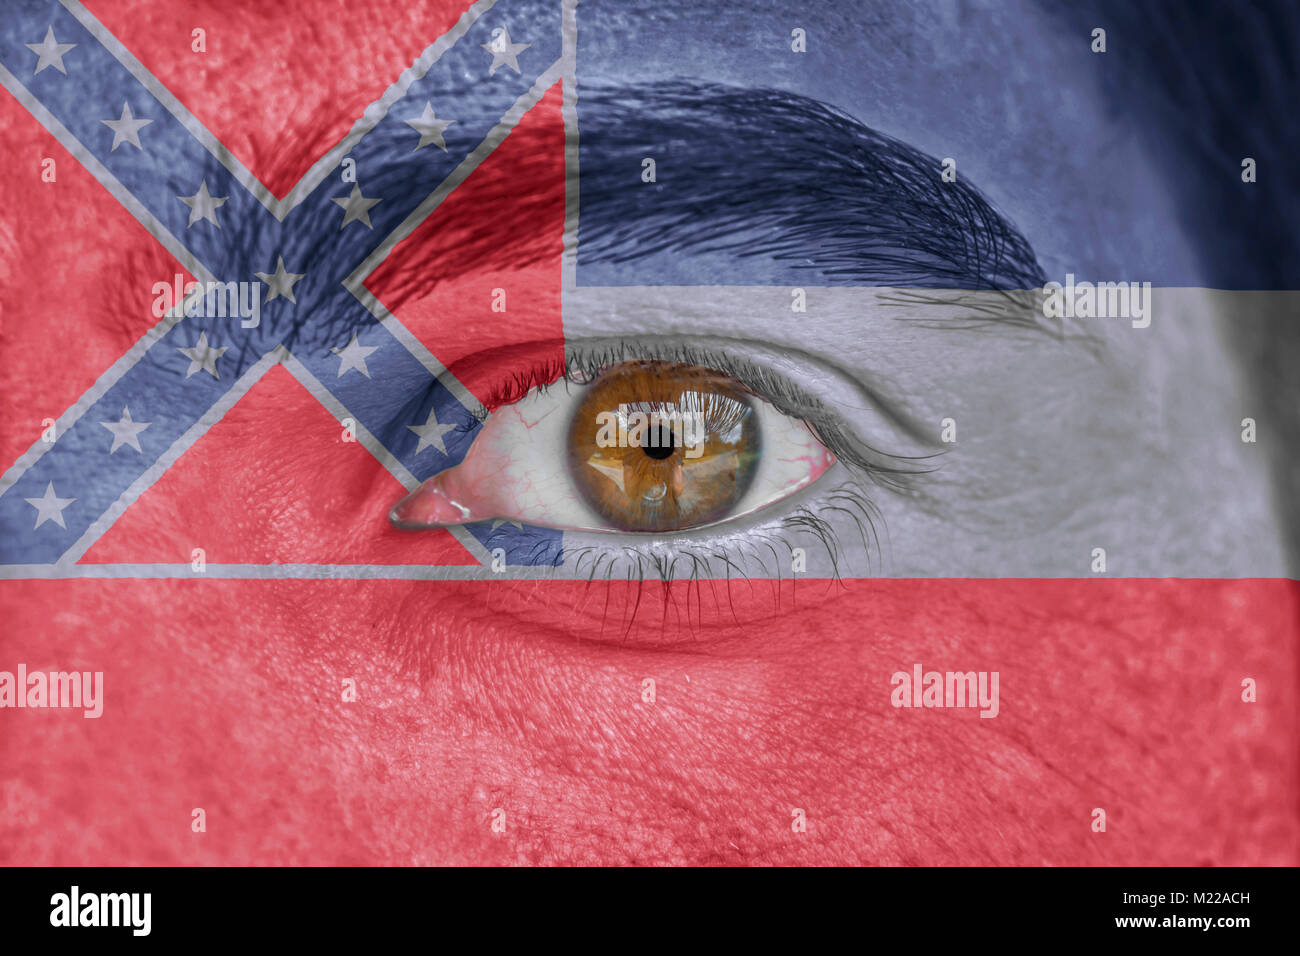 Human face and eye painted with US state flag of Mississippi Stock Photo